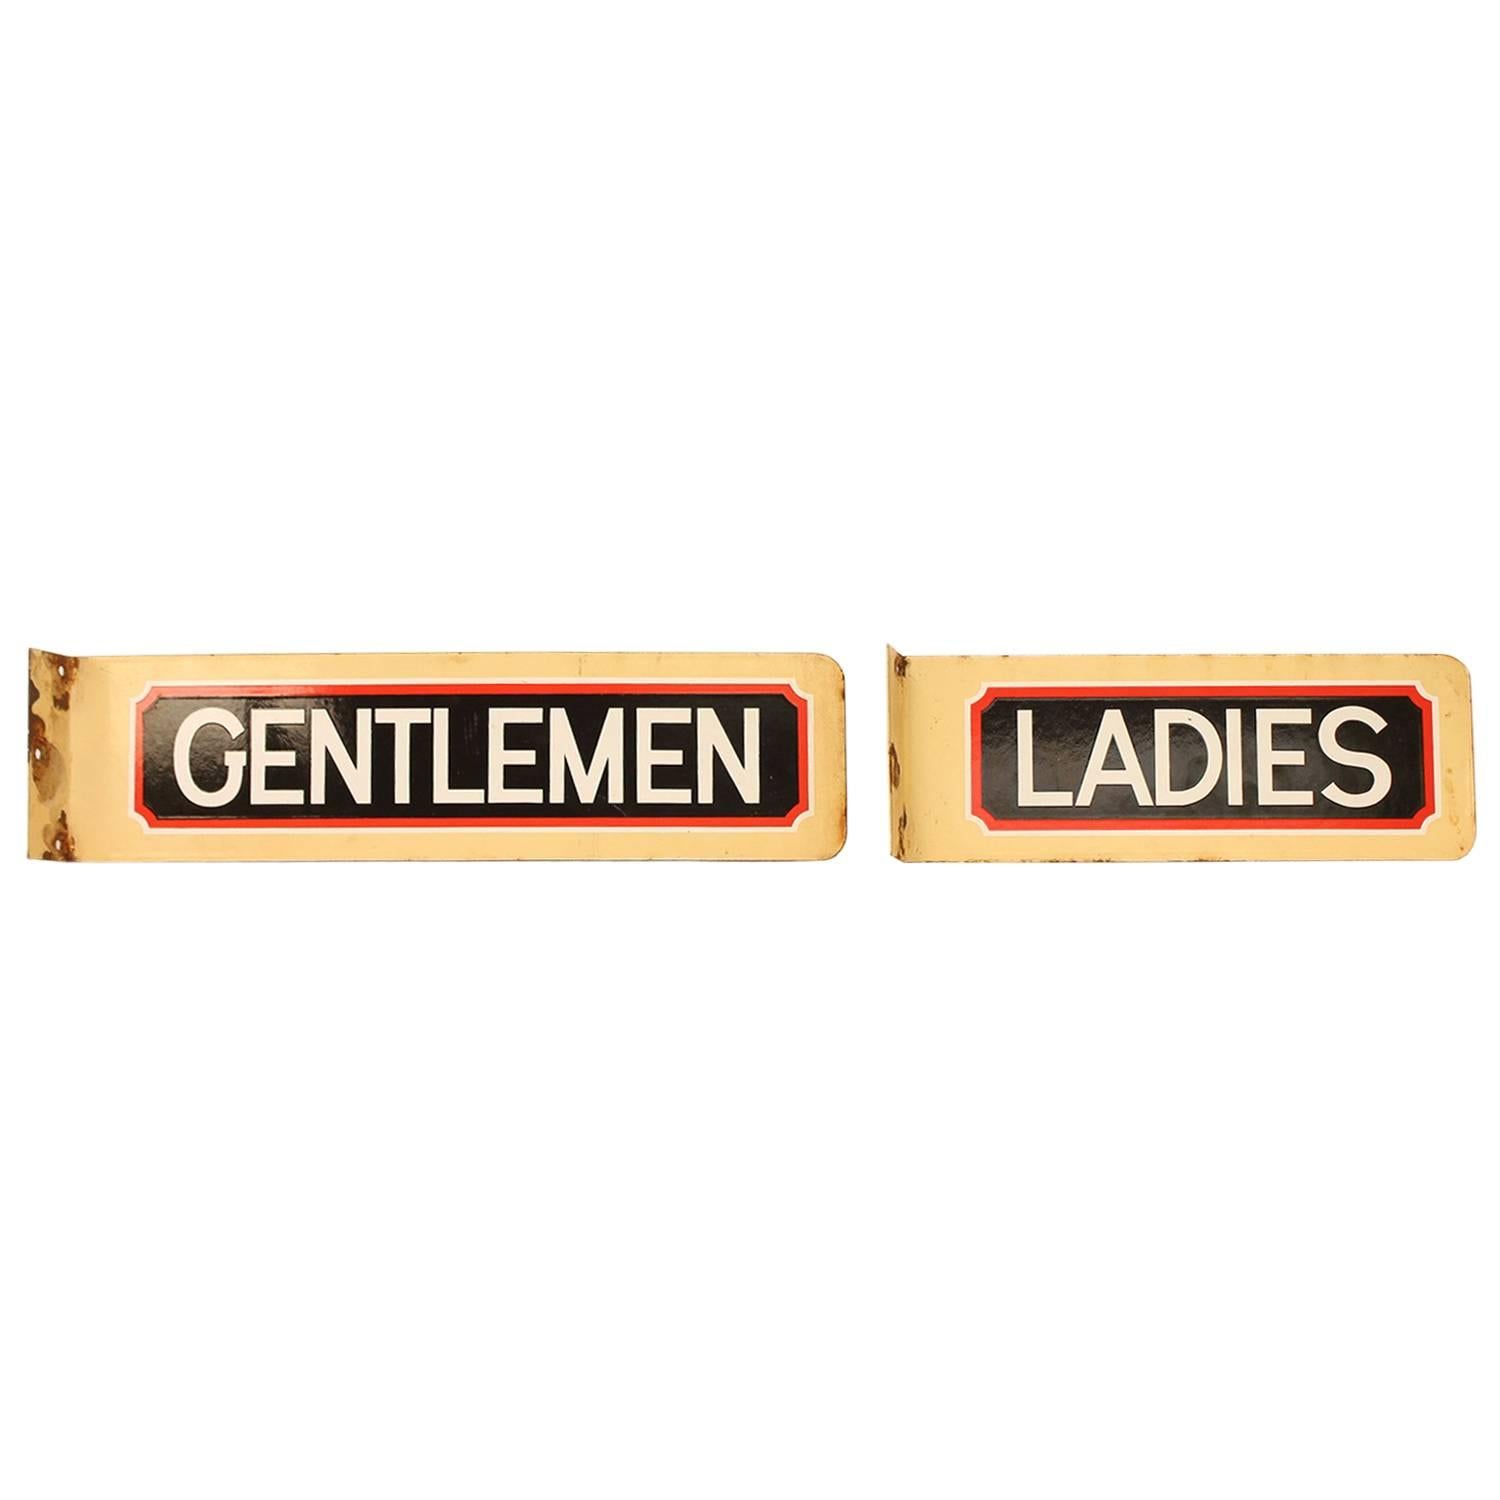 1930s Double-Sided Porcelain Restroom Signs